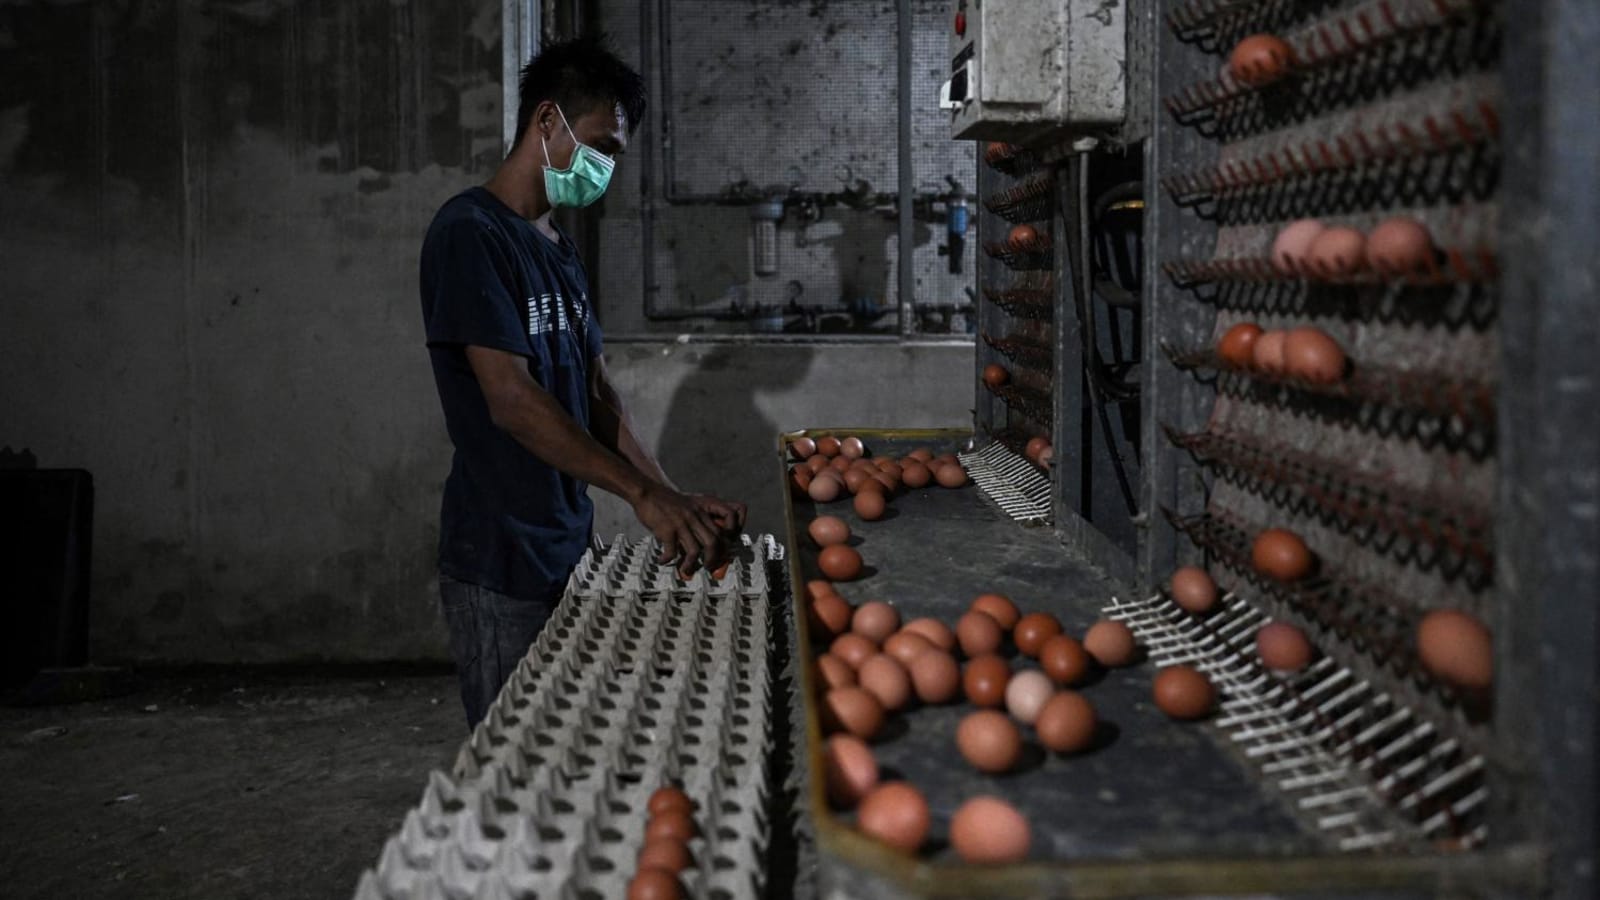 Malaysian domestic trade ministry pledges to solve egg shortage problem in KL, warns against panic buying